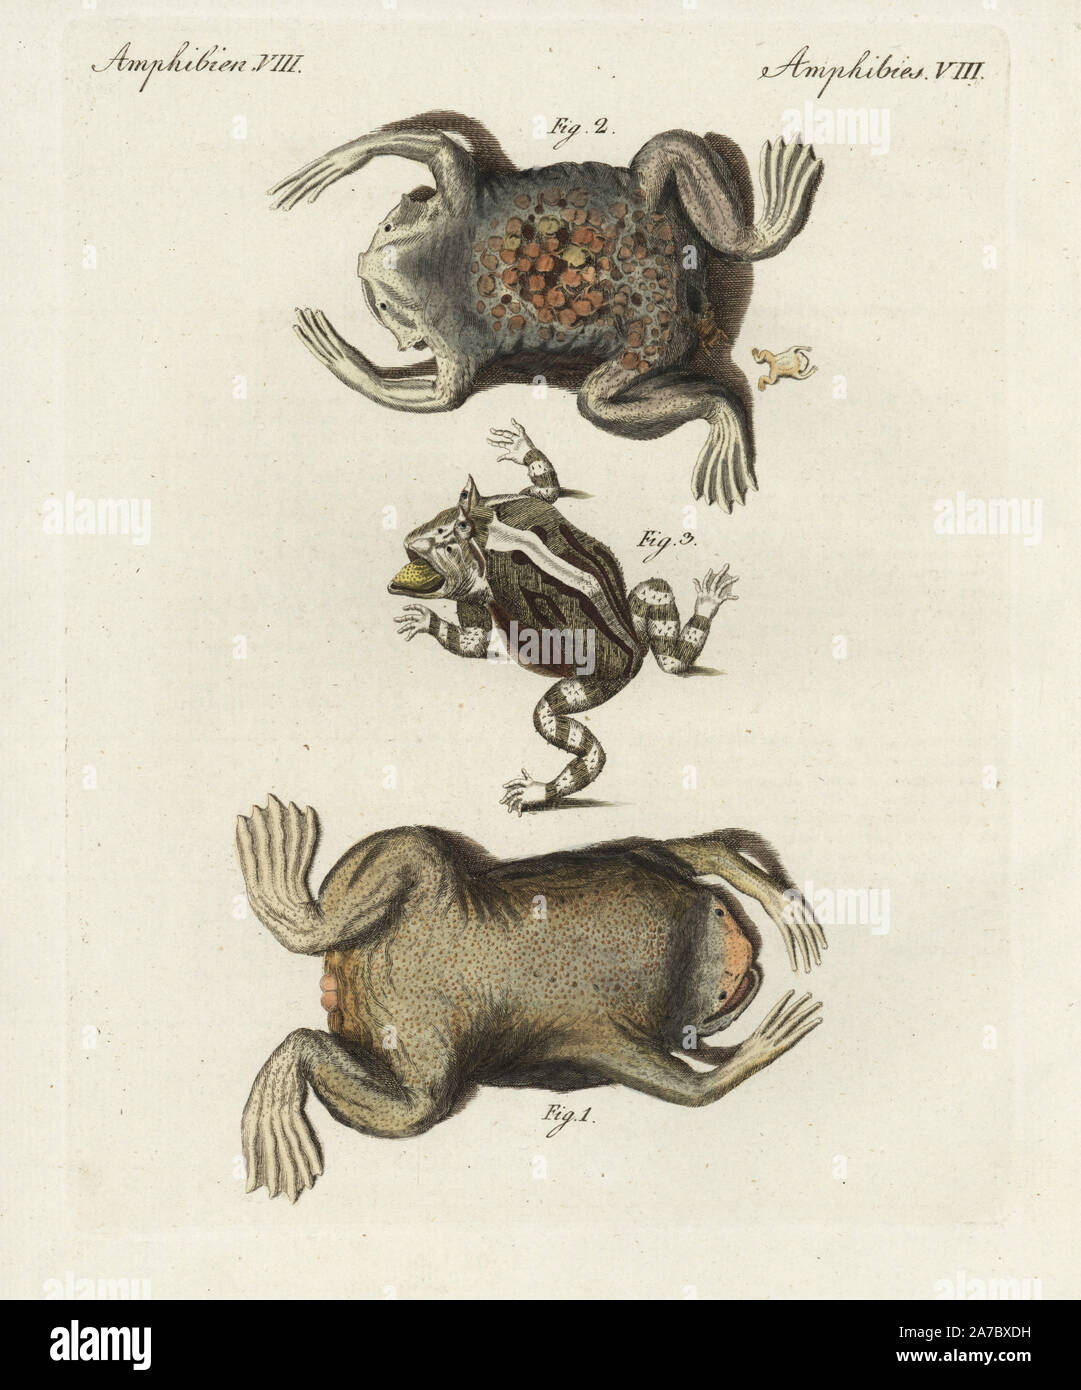 Surinam toad, Pipa pipa, male 1 and female with eggs on its back 2, and Surinam horned frog, Ceratophrys cornuta 3. Handcoloured copperplate engraving from Bertuch's 'Bilderbuch fur Kinder' (Picture Book for Children), Weimar, 1798. Friedrich Johann Bertuch (1747-1822) was a German publisher and man of arts most famous for his 12-volume encyclopedia for children illustrated with 1,200 engraved plates on natural history, science, costume, mythology, etc., published from 1790-1830. Stock Photo